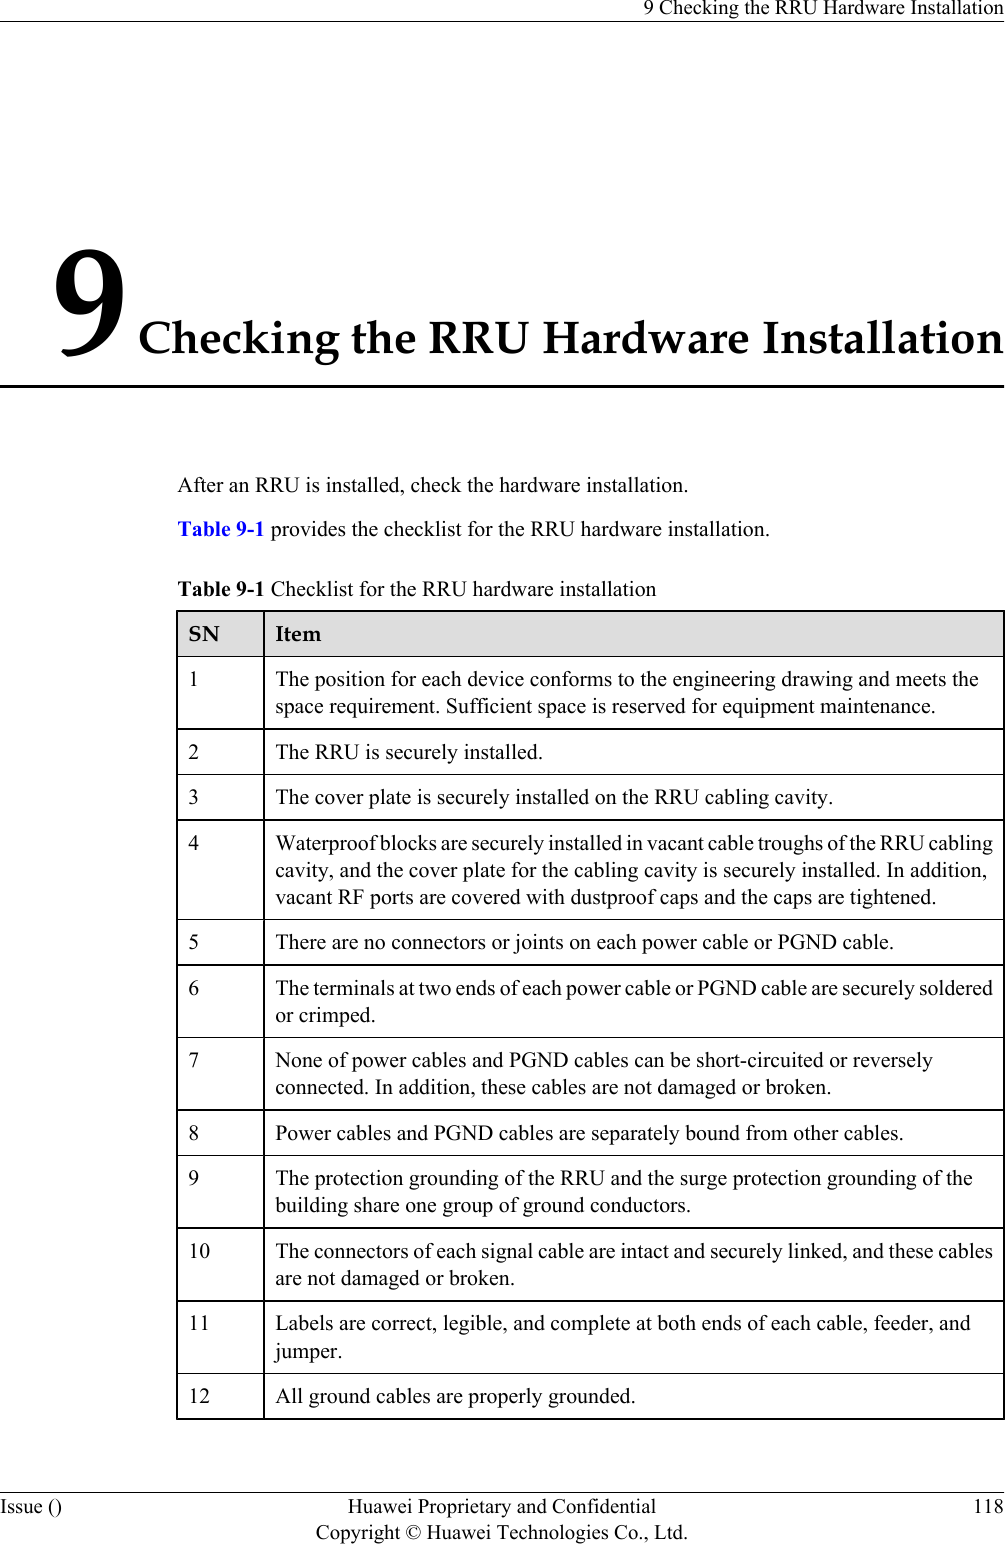 9 Checking the RRU Hardware InstallationAfter an RRU is installed, check the hardware installation.Table 9-1 provides the checklist for the RRU hardware installation.Table 9-1 Checklist for the RRU hardware installationSN Item1The position for each device conforms to the engineering drawing and meets thespace requirement. Sufficient space is reserved for equipment maintenance.2 The RRU is securely installed.3 The cover plate is securely installed on the RRU cabling cavity.4 Waterproof blocks are securely installed in vacant cable troughs of the RRU cablingcavity, and the cover plate for the cabling cavity is securely installed. In addition,vacant RF ports are covered with dustproof caps and the caps are tightened.5 There are no connectors or joints on each power cable or PGND cable.6 The terminals at two ends of each power cable or PGND cable are securely solderedor crimped.7 None of power cables and PGND cables can be short-circuited or reverselyconnected. In addition, these cables are not damaged or broken.8 Power cables and PGND cables are separately bound from other cables.9 The protection grounding of the RRU and the surge protection grounding of thebuilding share one group of ground conductors.10 The connectors of each signal cable are intact and securely linked, and these cablesare not damaged or broken.11 Labels are correct, legible, and complete at both ends of each cable, feeder, andjumper.12 All ground cables are properly grounded.9 Checking the RRU Hardware InstallationIssue () Huawei Proprietary and ConfidentialCopyright © Huawei Technologies Co., Ltd.118